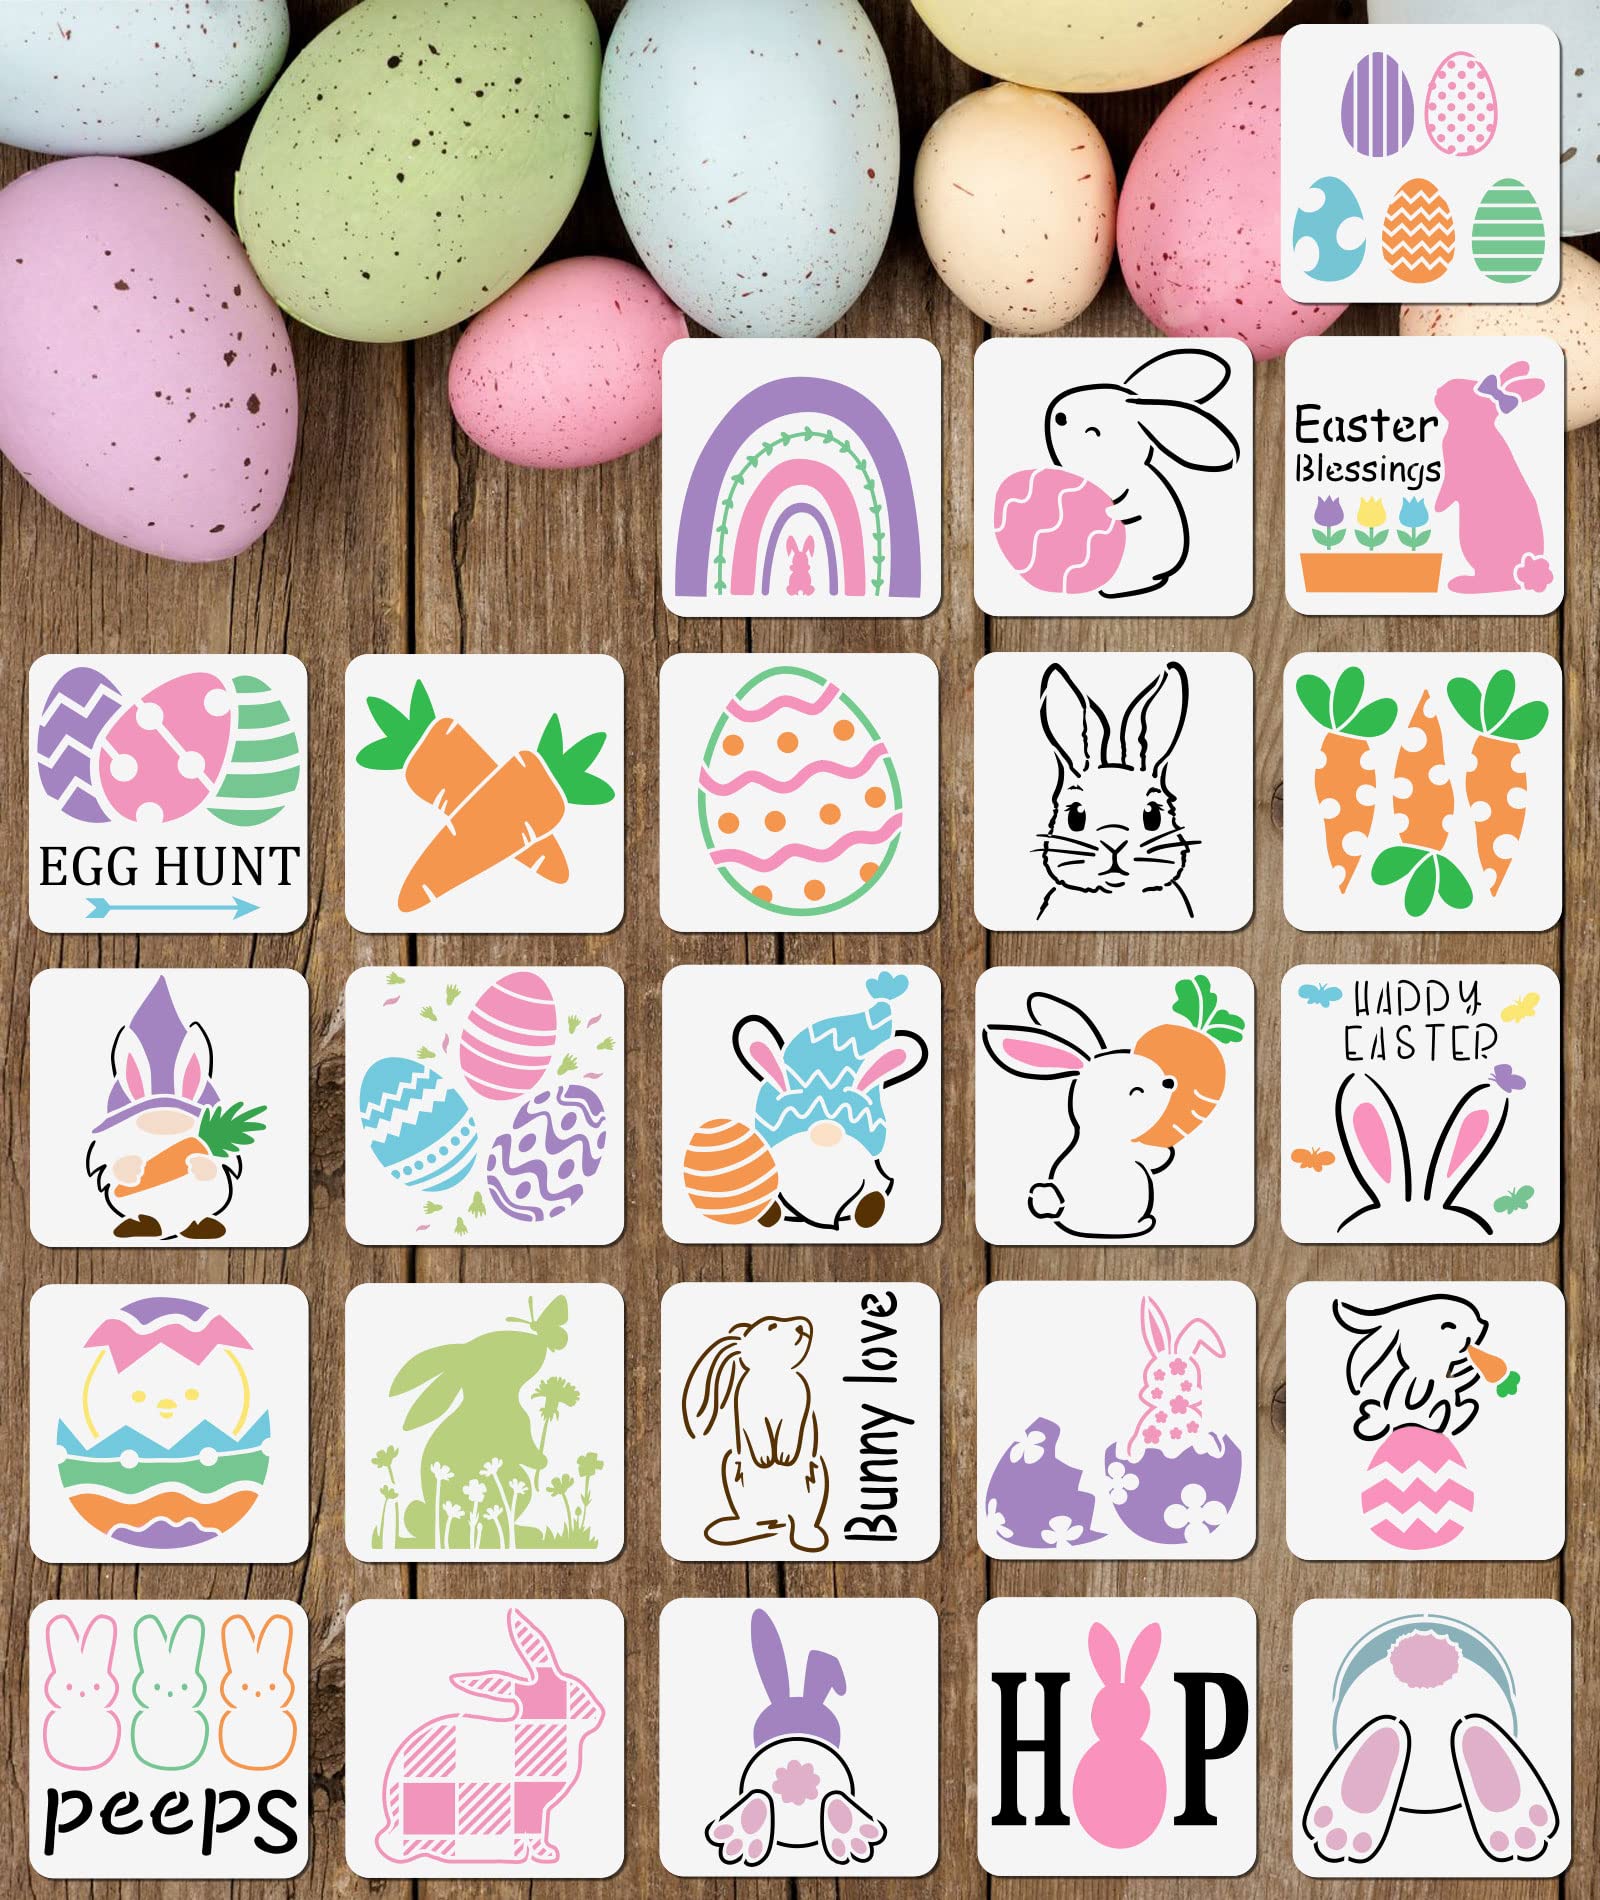 24Pcs 3x3 Inch Small Easter Stencils for Painting on Wood,Include  Carrot/Egg/Peeps/Bunny Stencils for DIY Crafts Ornaments